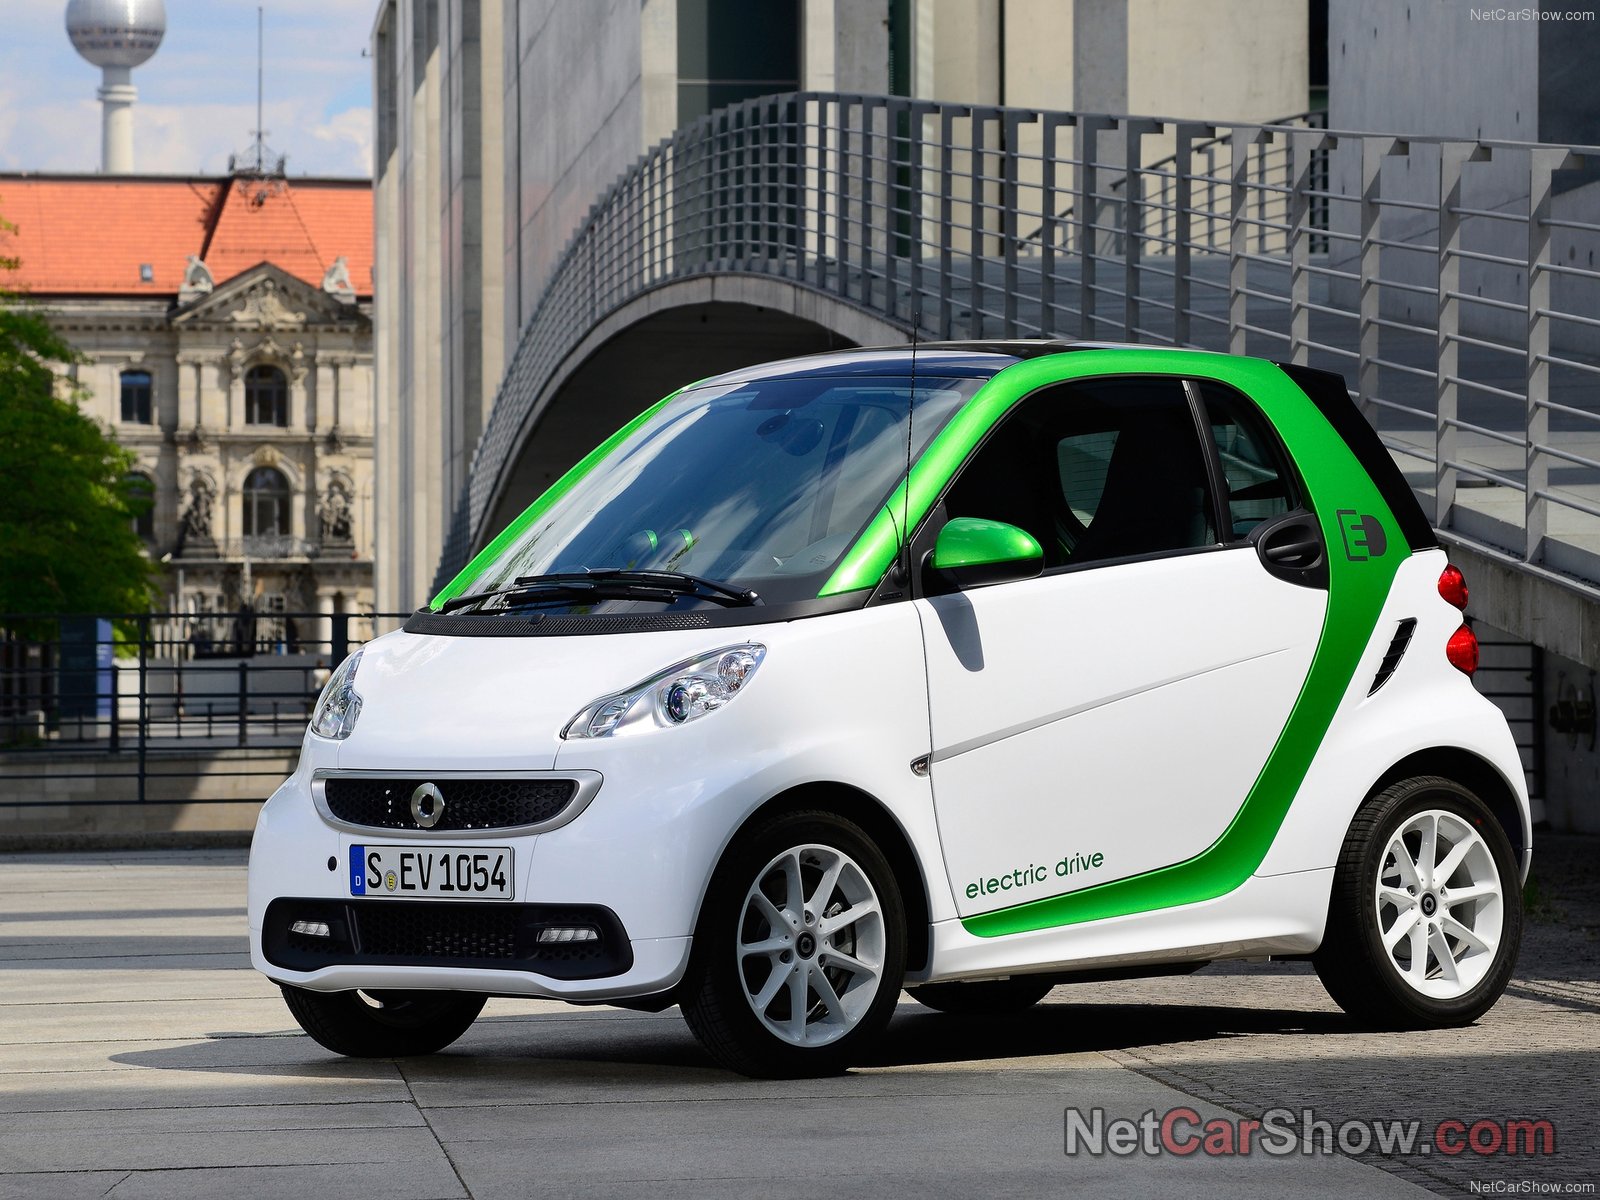 Электронные машины автомобили. Smart Fortwo Electric Drive, 2015. Smart Fortwo электро. Мерседес микро смарт. Used 2015 Smart Fortwo Electric.